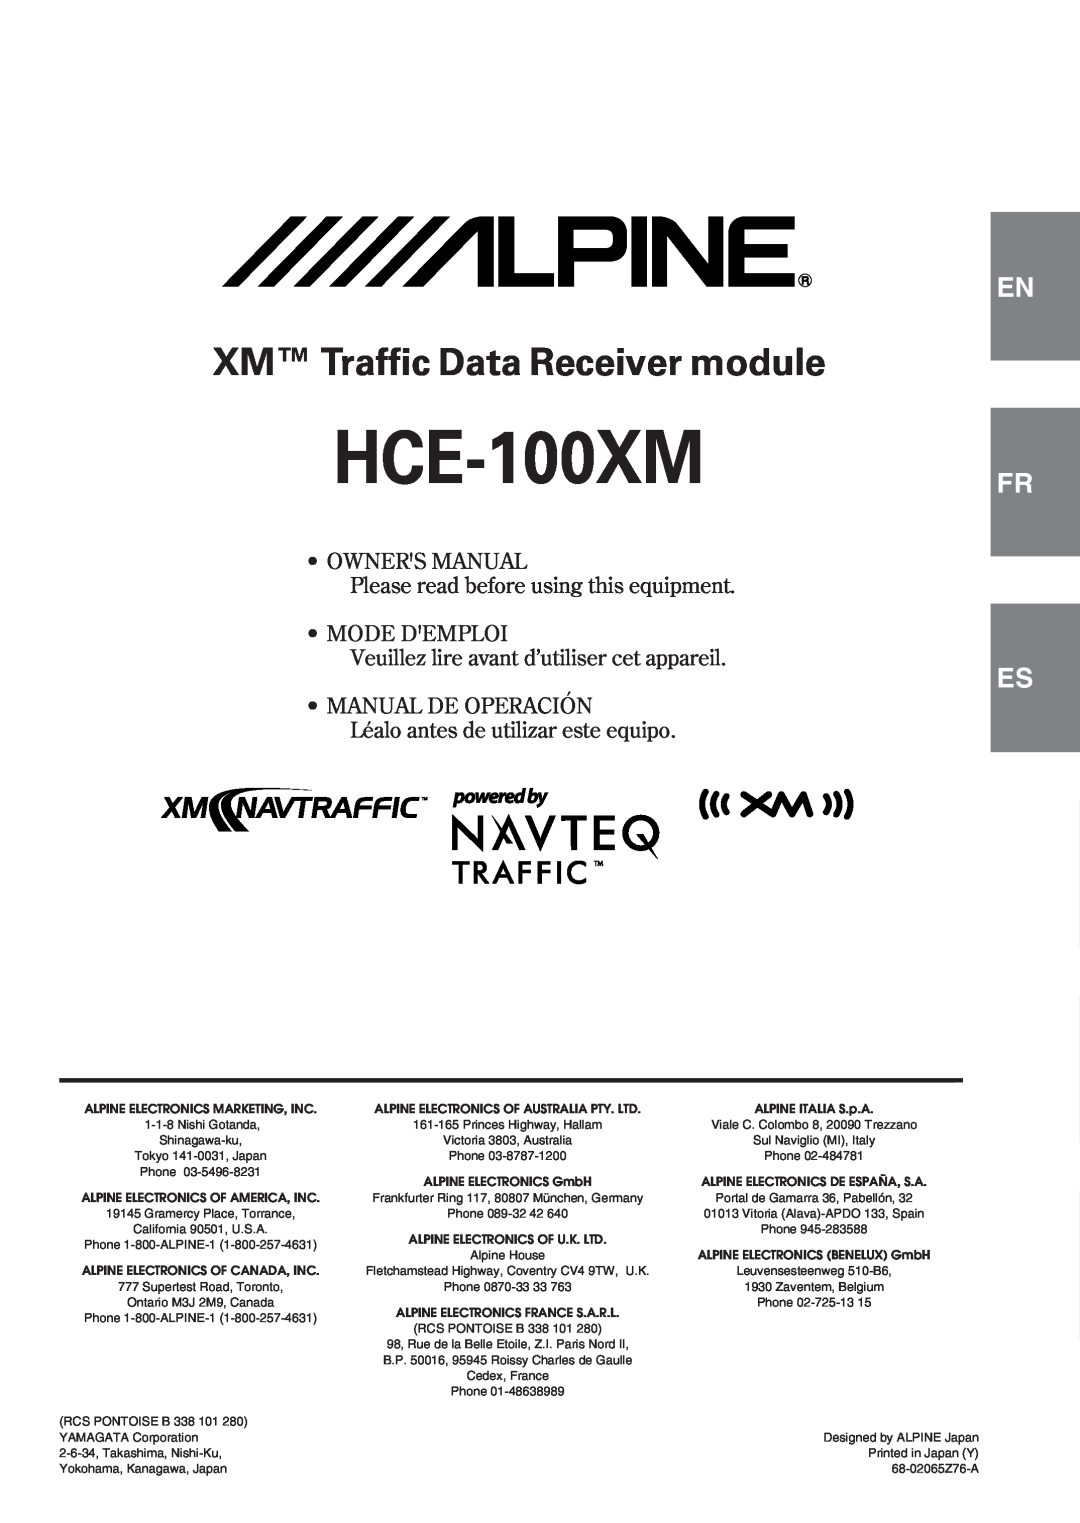 Alpine HCE-100XM owner manual XM Traffic Data Receiver module, Es It Se, Please read before using this equipment 